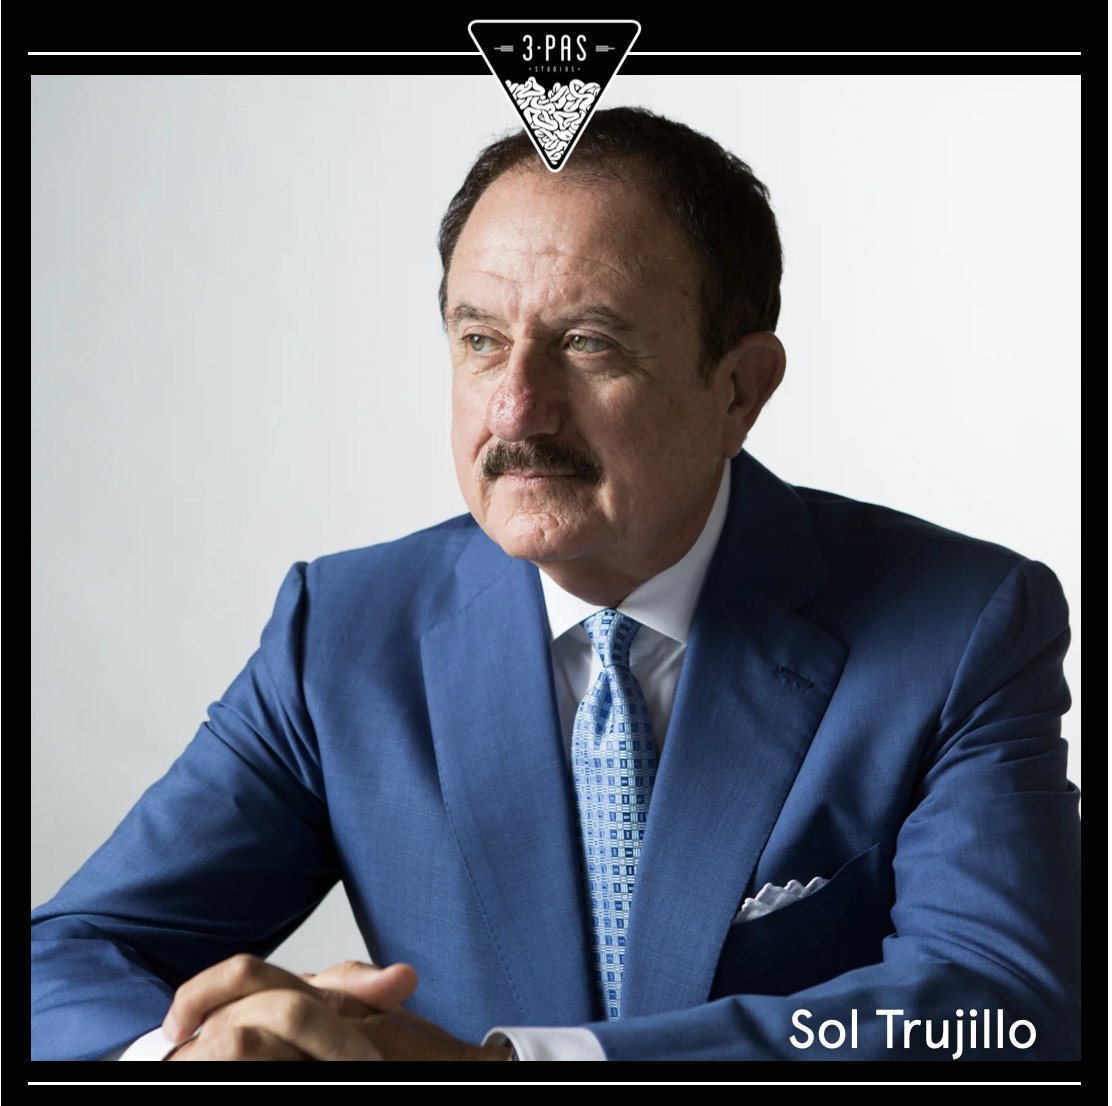 Congrats to our friend @soltrujillo69 on his 5th annual @LATTITUDEevent conference! With his partners @garynahrep, @EmilioEstefanJr & Oscar Munoz, L'ATTITUDE is now one of the most important events of the year and we're proud supporters! #LatinosUnidos time.com/6216102/sol-tr…